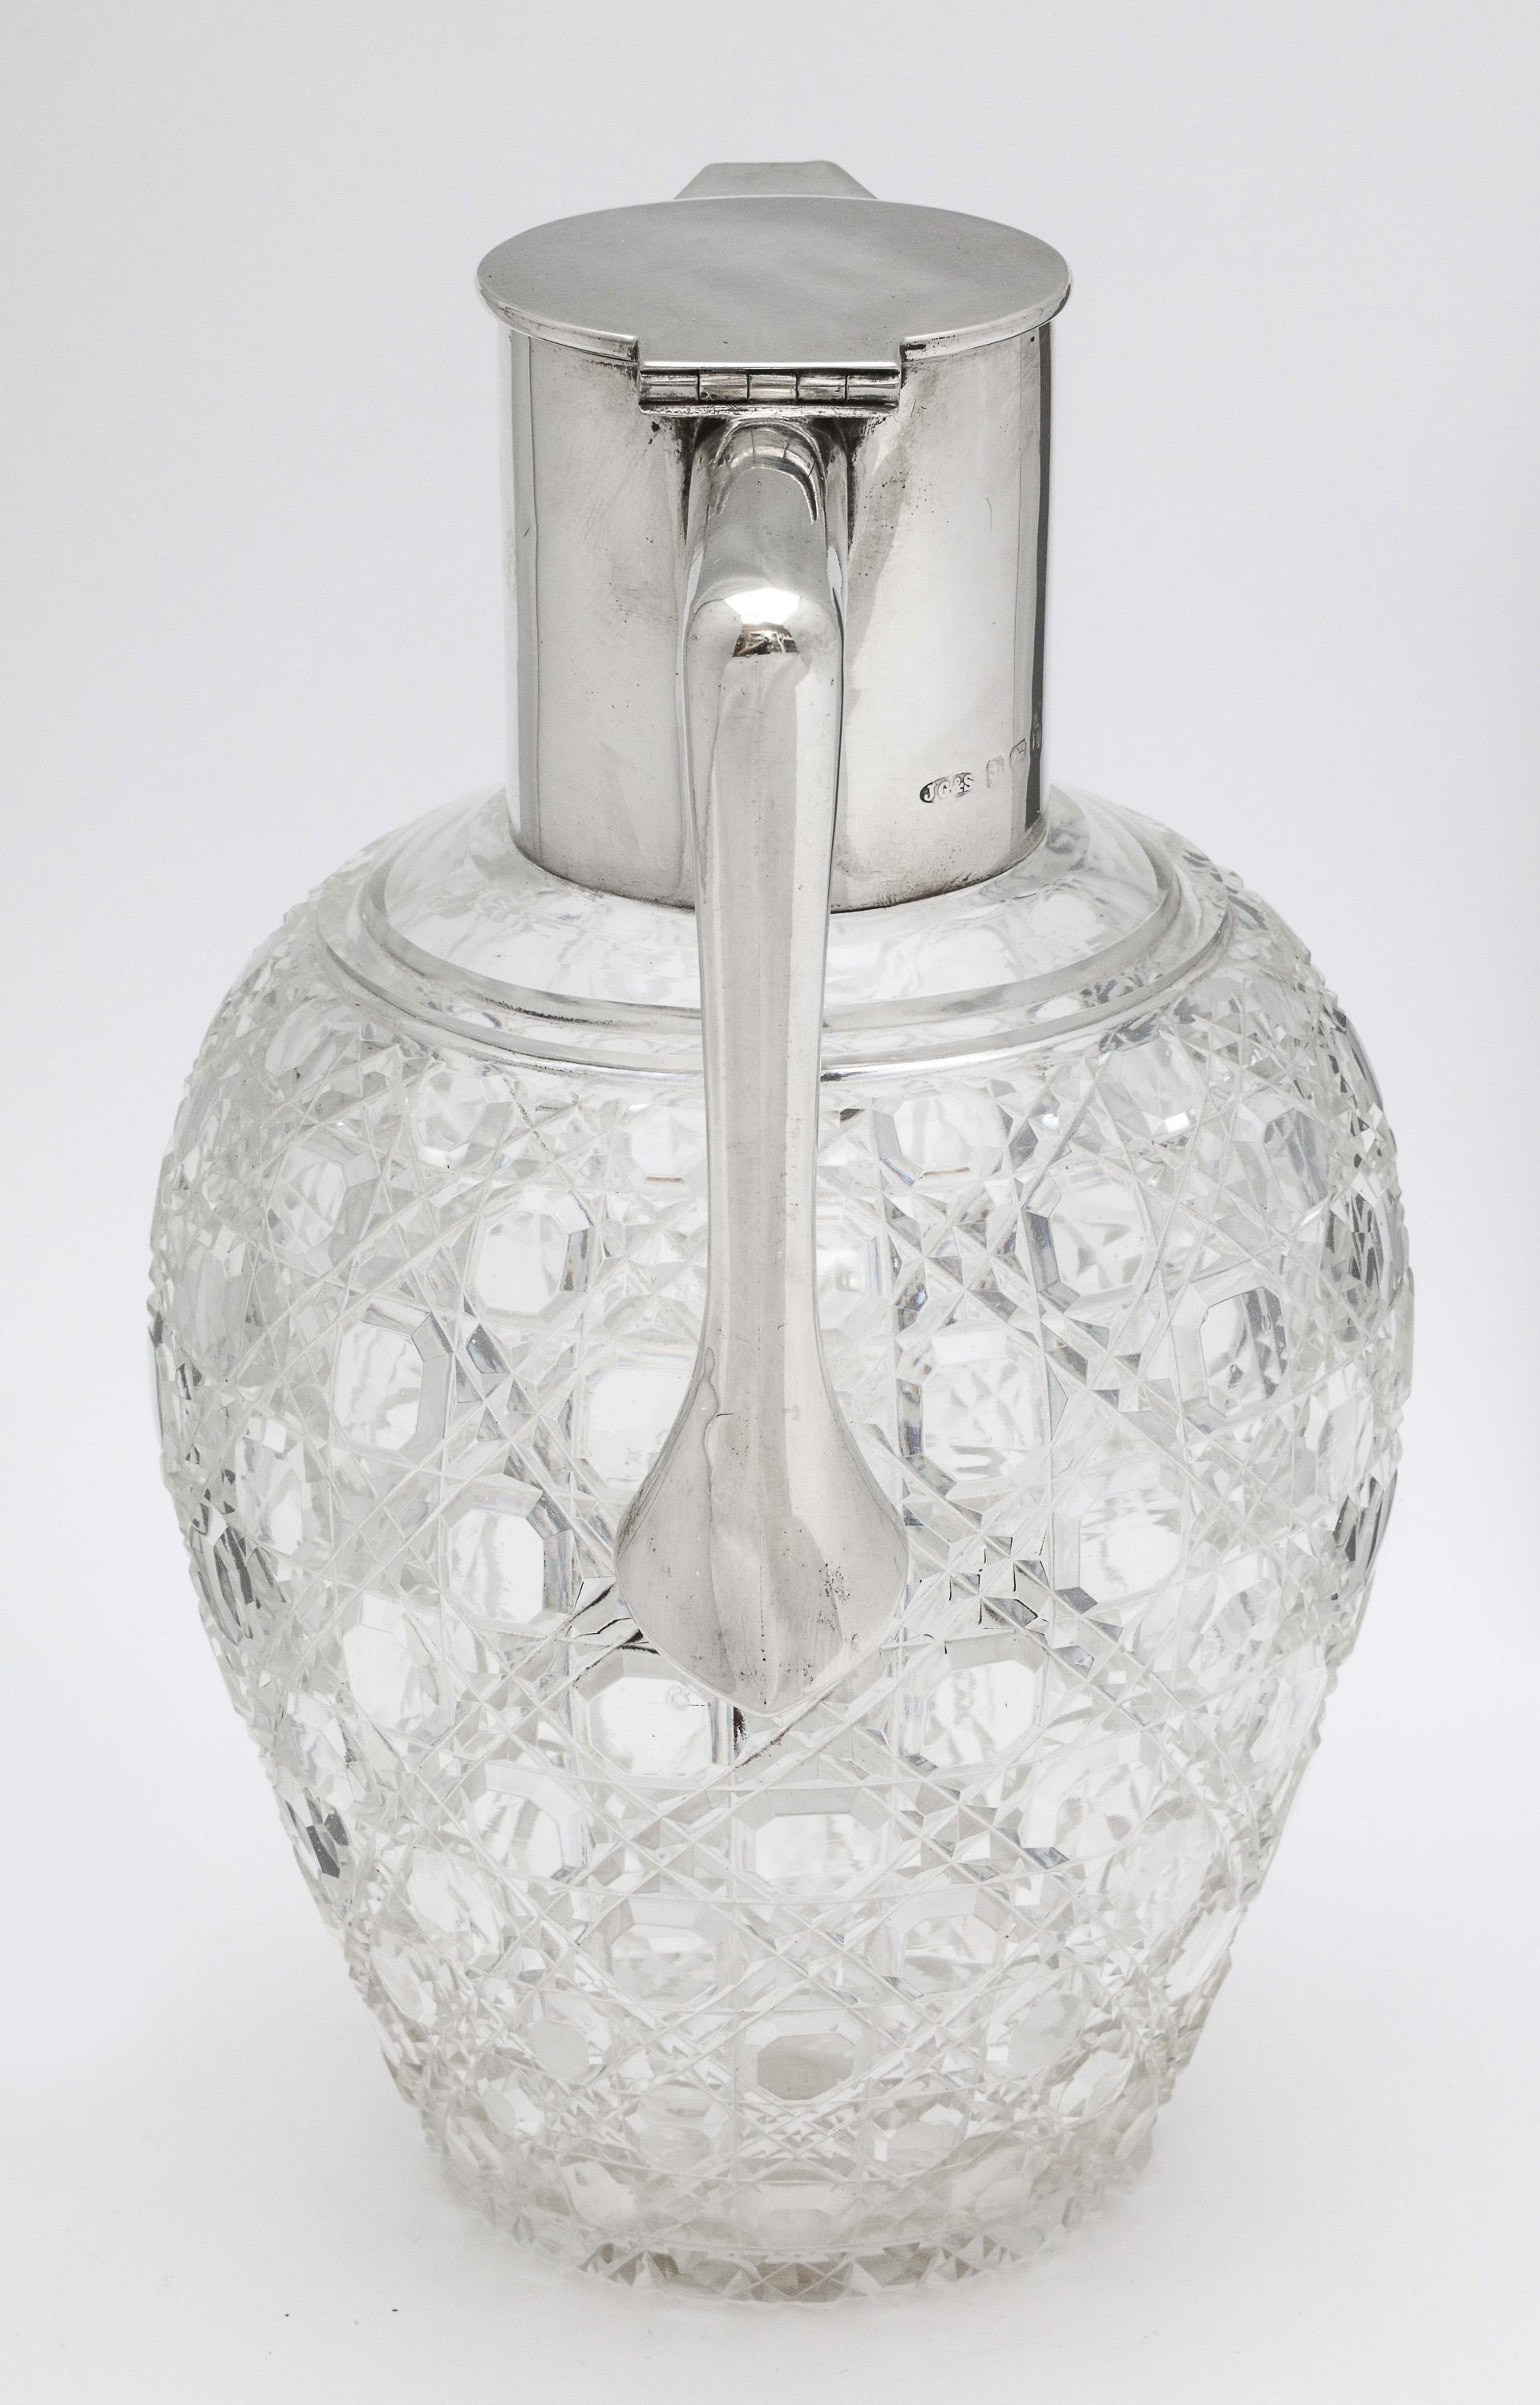 Early 20th Century Edwardian Sterling Silver-Mounted Hobnail-Cut Claret Jug By J. Grinsell & Sons